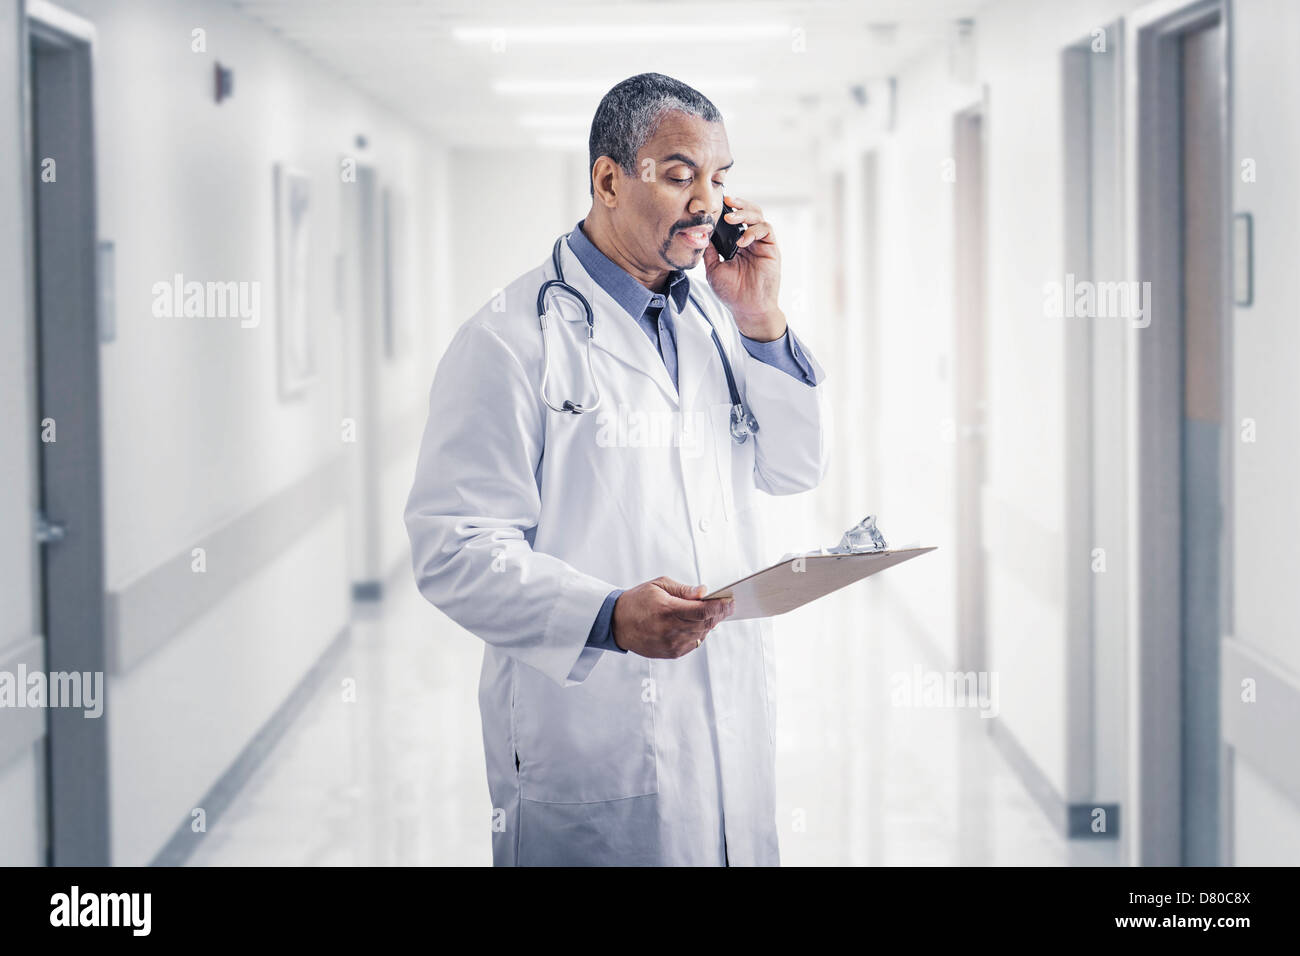 Mixed Race doctor talking on cell phone in hospital Banque D'Images